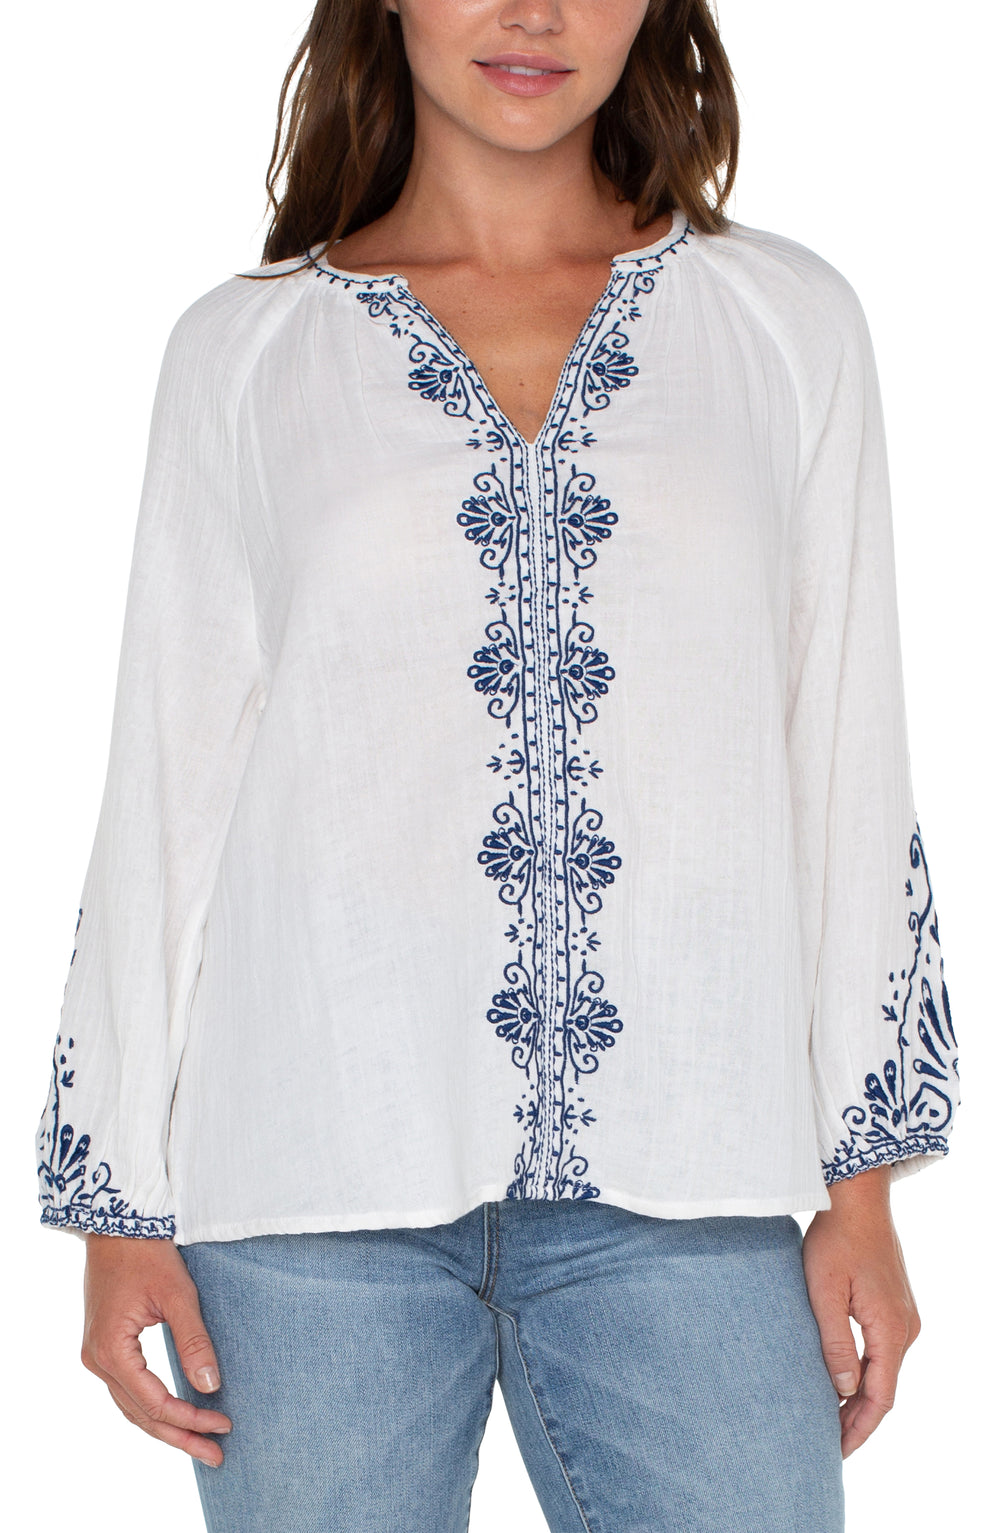 White blouse with blue embroidered detail - Tru Blue Boutique